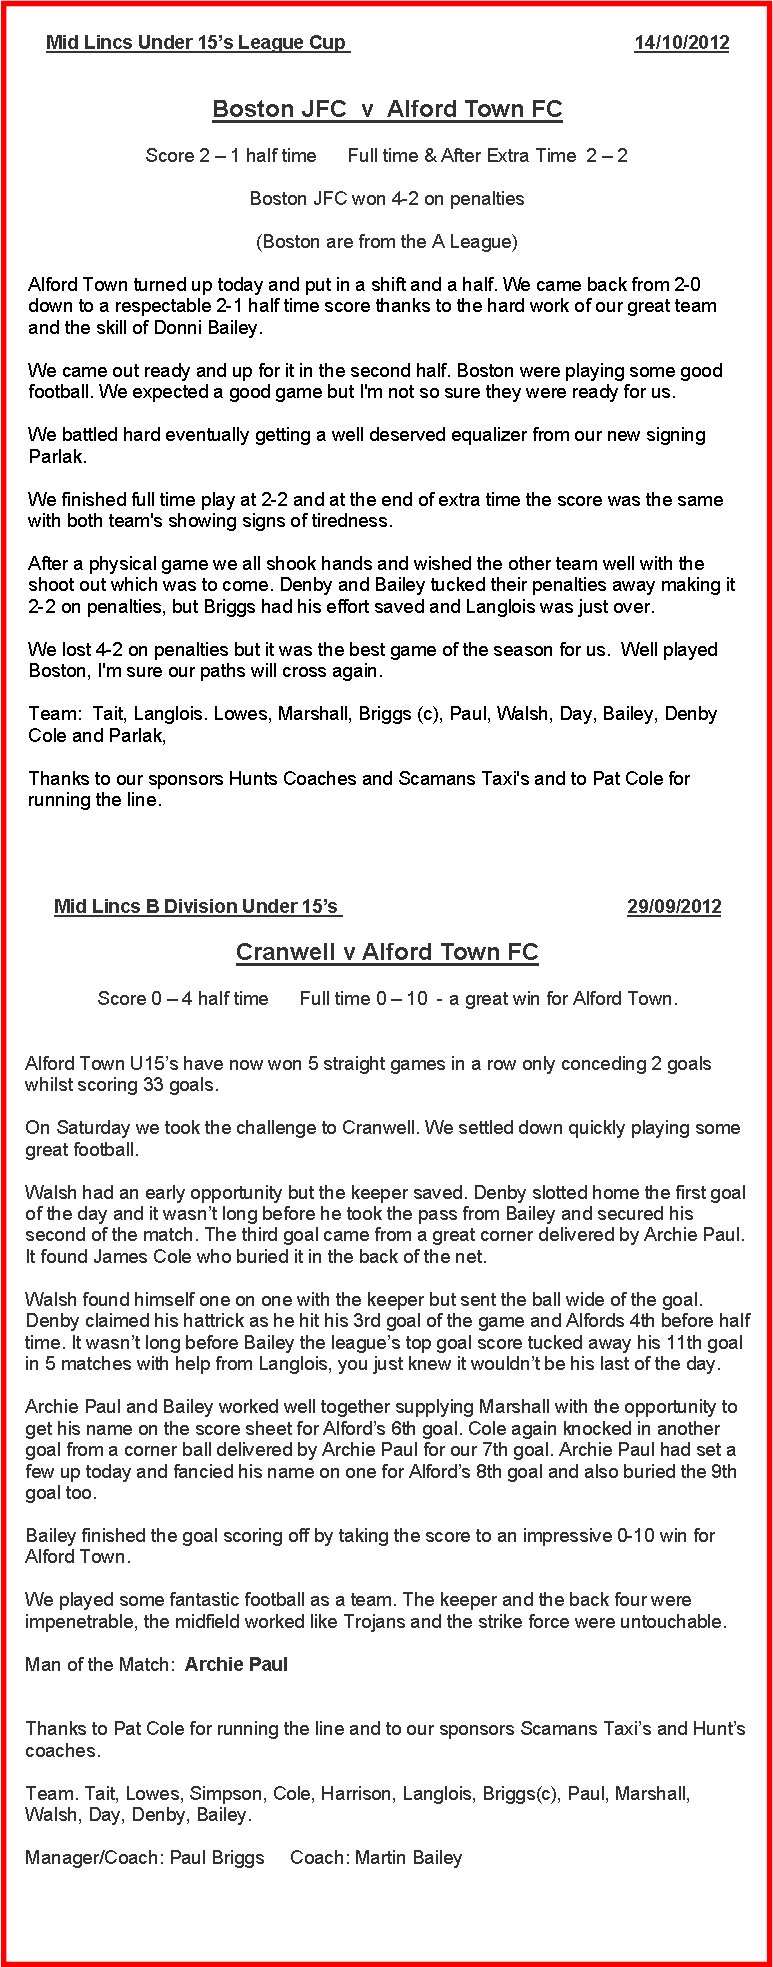 Text Box: Mid Lincs Under 15’s League Cup                                                        14/10/2012
Boston JFC  v  Alford Town FC Score 2 – 1 half time      Full time & After Extra Time  2 – 2 Boston JFC won 4-2 on penalties(Boston are from the A League)Alford Town turned up today and put in a shift and a half. We came back from 2-0 down to a respectable 2-1 half time score thanks to the hard work of our great team and the skill of Donni Bailey.We came out ready and up for it in the second half. Boston were playing some good football. We expected a good game but I'm not so sure they were ready for us.We battled hard eventually getting a well deserved equalizer from our new signing Parlak.We finished full time play at 2-2 and at the end of extra time the score was the same with both team's showing signs of tiredness.After a physical game we all shook hands and wished the other team well with the shoot out which was to come. Denby and Bailey tucked their penalties away making it 2-2 on penalties, but Briggs had his effort saved and Langlois was just over.We lost 4-2 on penalties but it was the best game of the season for us.  Well played Boston, I'm sure our paths will cross again.Team:  Tait, Langlois. Lowes, Marshall, Briggs (c), Paul, Walsh, Day, Bailey, Denby Cole and Parlak,Thanks to our sponsors Hunts Coaches and Scamans Taxi's and to Pat Cole for running the line.Mid Lincs B Division Under 15’s                                                        29/09/2012
Cranwell v Alford Town FC Score 0 – 4 half time      Full time 0 – 10  - a great win for Alford Town.
Alford Town U15’s have now won 5 straight games in a row only conceding 2 goals whilst scoring 33 goals.
On Saturday we took the challenge to Cranwell. We settled down quickly playing some great football. Walsh had an early opportunity but the keeper saved. Denby slotted home the first goal of the day and it wasn’t long before he took the pass from Bailey and secured his second of the match. The third goal came from a great corner delivered by Archie Paul. It found James Cole who buried it in the back of the net. Walsh found himself one on one with the keeper but sent the ball wide of the goal. Denby claimed his hattrick as he hit his 3rd goal of the game and Alfords 4th before half time. It wasn’t long before Bailey the league’s top goal score tucked away his 11th goal in 5 matches with help from Langlois, you just knew it wouldn’t be his last of the day.
Archie Paul and Bailey worked well together supplying Marshall with the opportunity to get his name on the score sheet for Alford’s 6th goal. Cole again knocked in another goal from a corner ball delivered by Archie Paul for our 7th goal. Archie Paul had set a few up today and fancied his name on one for Alford’s 8th goal and also buried the 9th goal too.
Bailey finished the goal scoring off by taking the score to an impressive 0-10 win for Alford Town.We played some fantastic football as a team. The keeper and the back four were impenetrable, the midfield worked like Trojans and the strike force were untouchable.
Man of the Match:  Archie Paul
Thanks to Pat Cole for running the line and to our sponsors Scamans Taxi’s and Hunt’s coaches.
Team. Tait, Lowes, Simpson, Cole, Harrison, Langlois, Briggs(c), Paul, Marshall, Walsh, Day, Denby, Bailey.
Manager/Coach: Paul Briggs     Coach: Martin Bailey